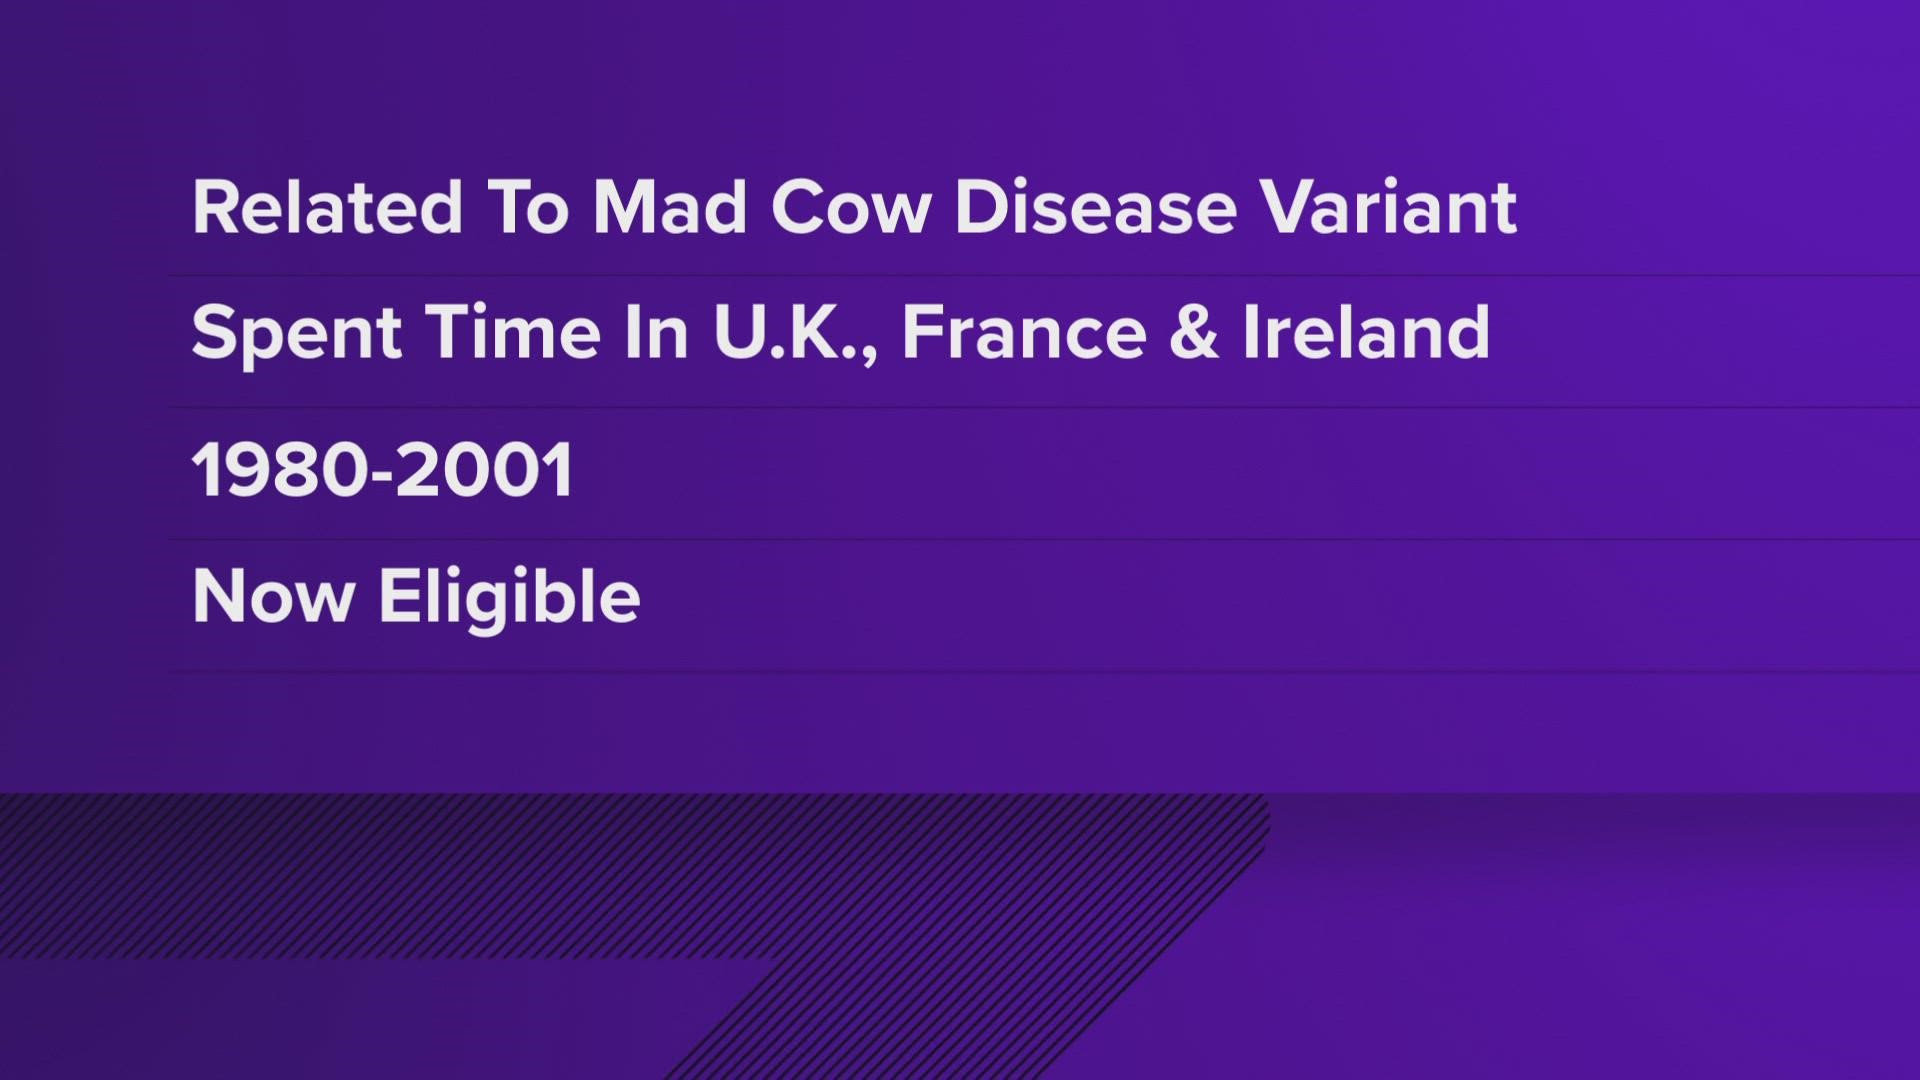 The American Red Cross has announced that people who've not been able to give blood in the past due a variant closely related to mad cow disease can now donate.